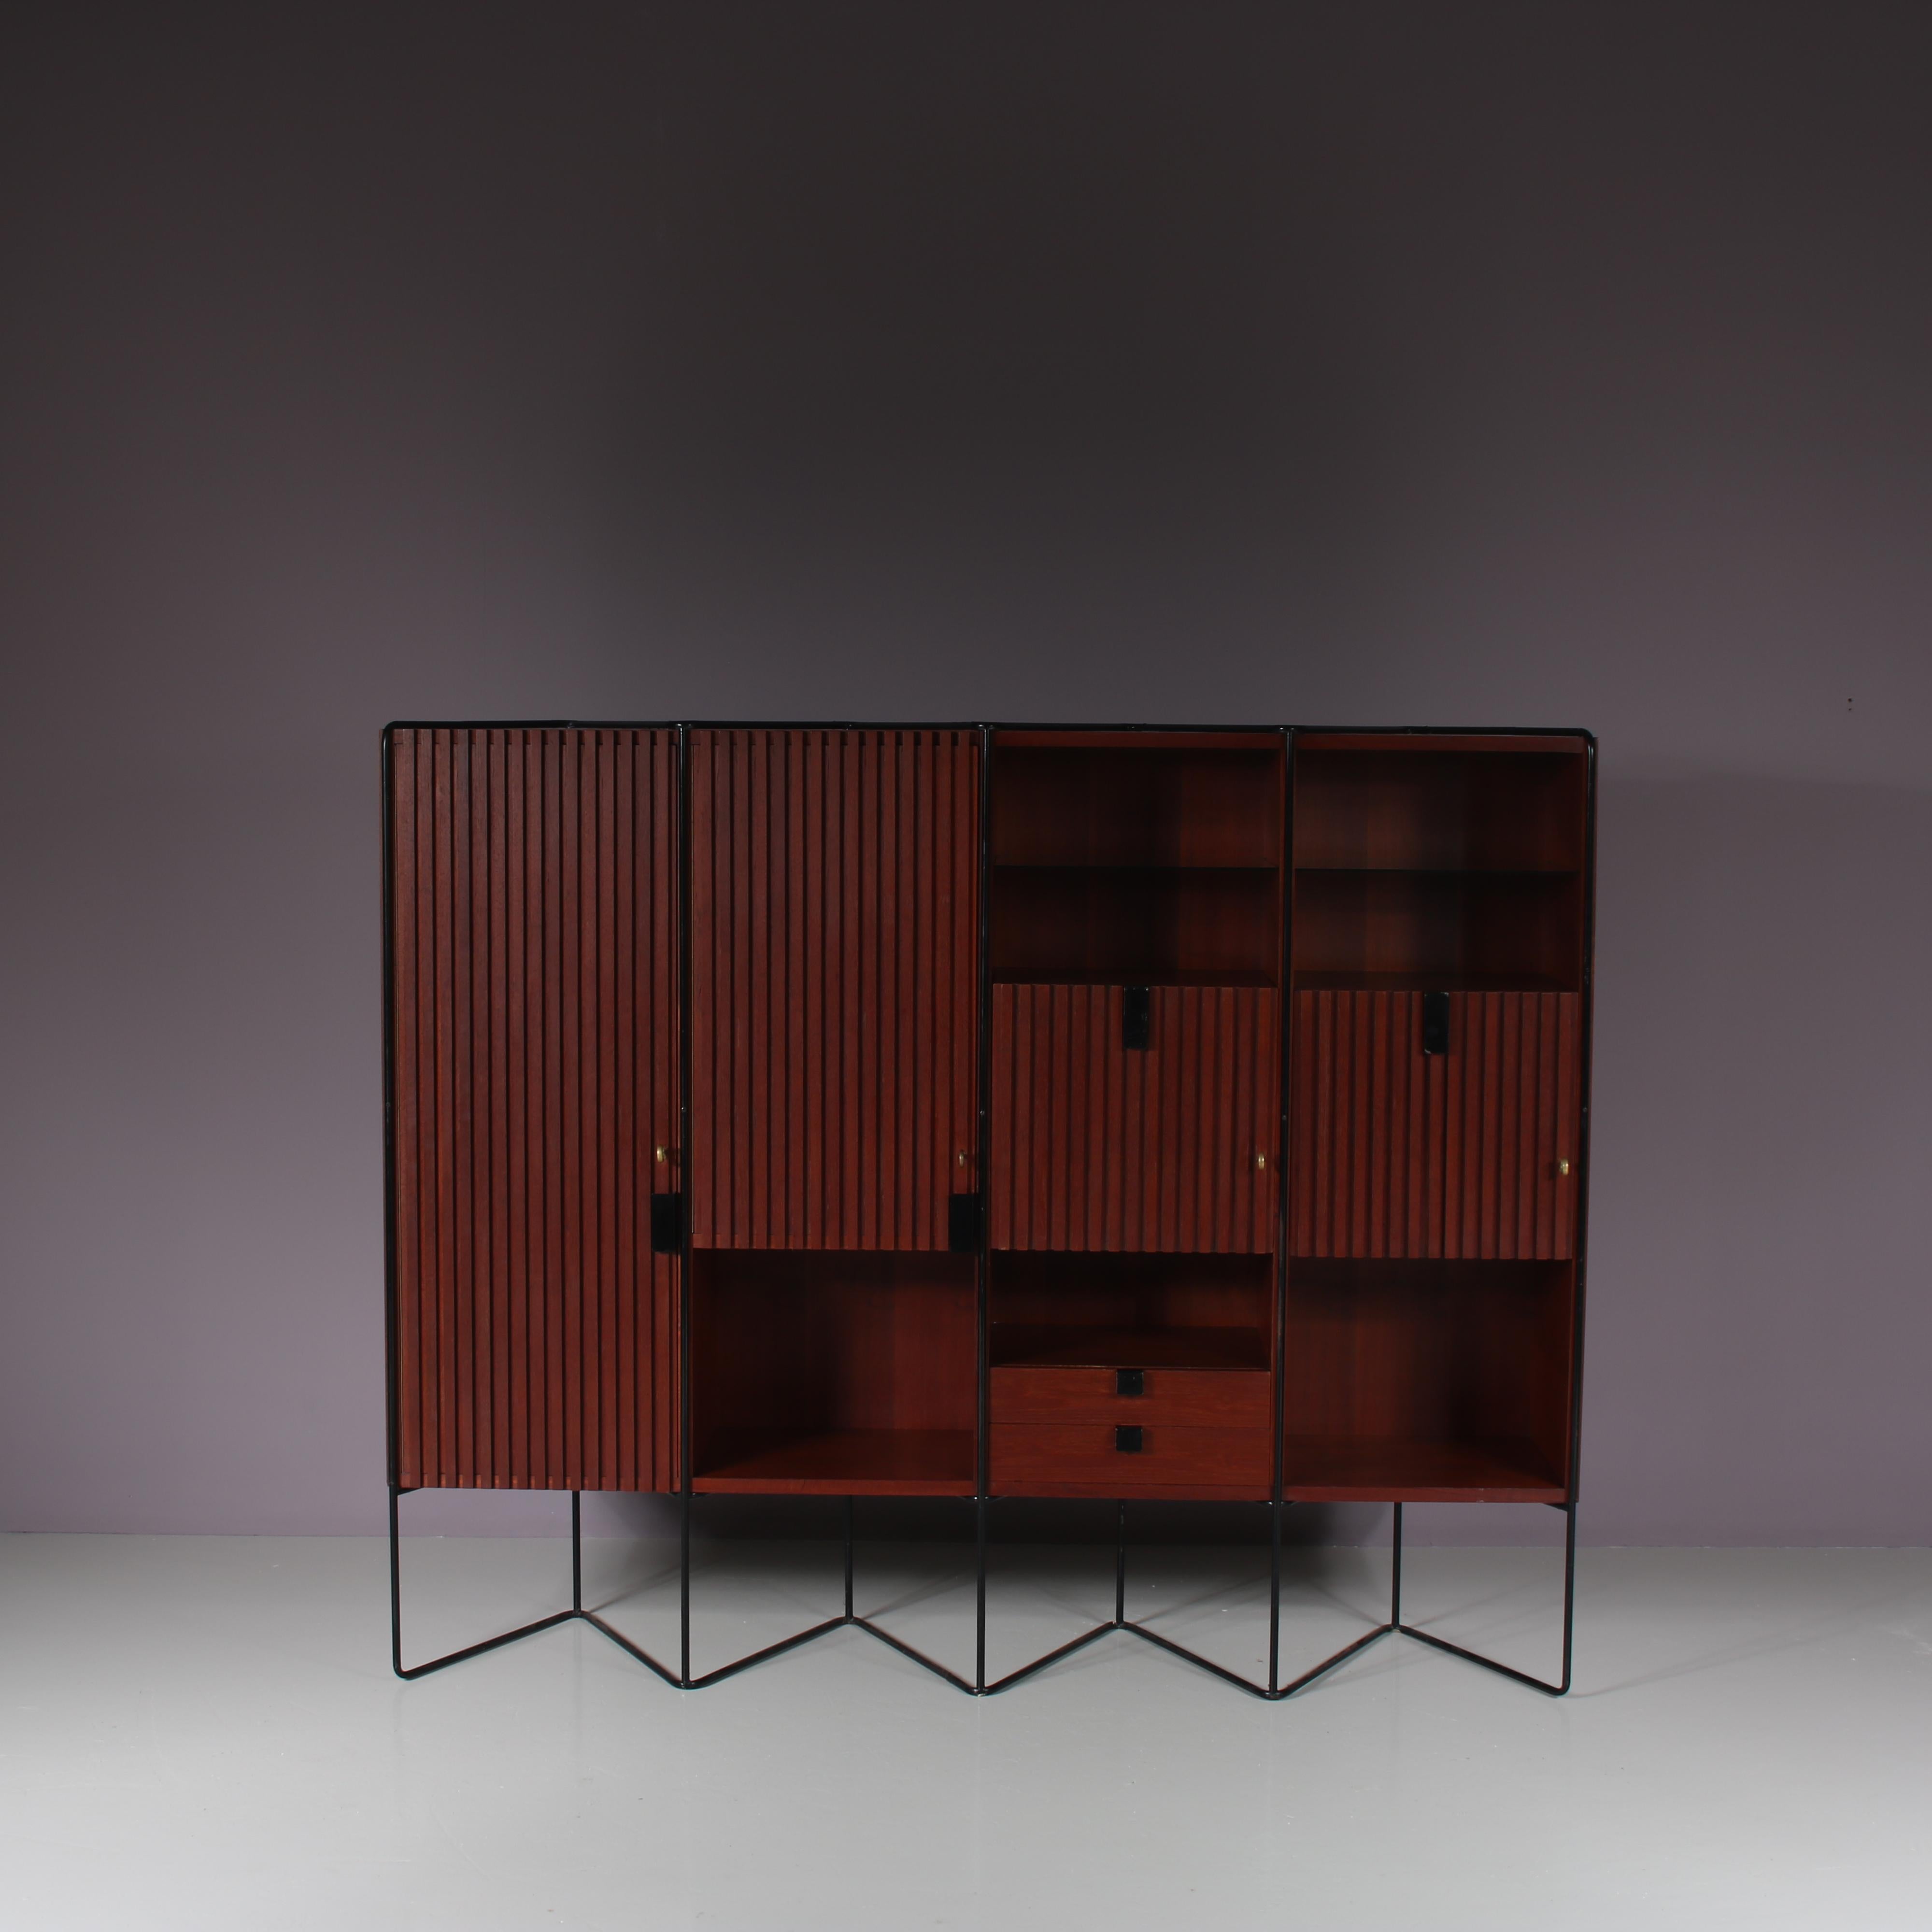 This outstanding cabinet is a design by Taichiro Nakai, manufactured by La Permanente Mobili in Italy around 1960.

Made of high quality teak wood in a warm brown colour on a thin, tubular black metal base. The finish of the many elements is truly